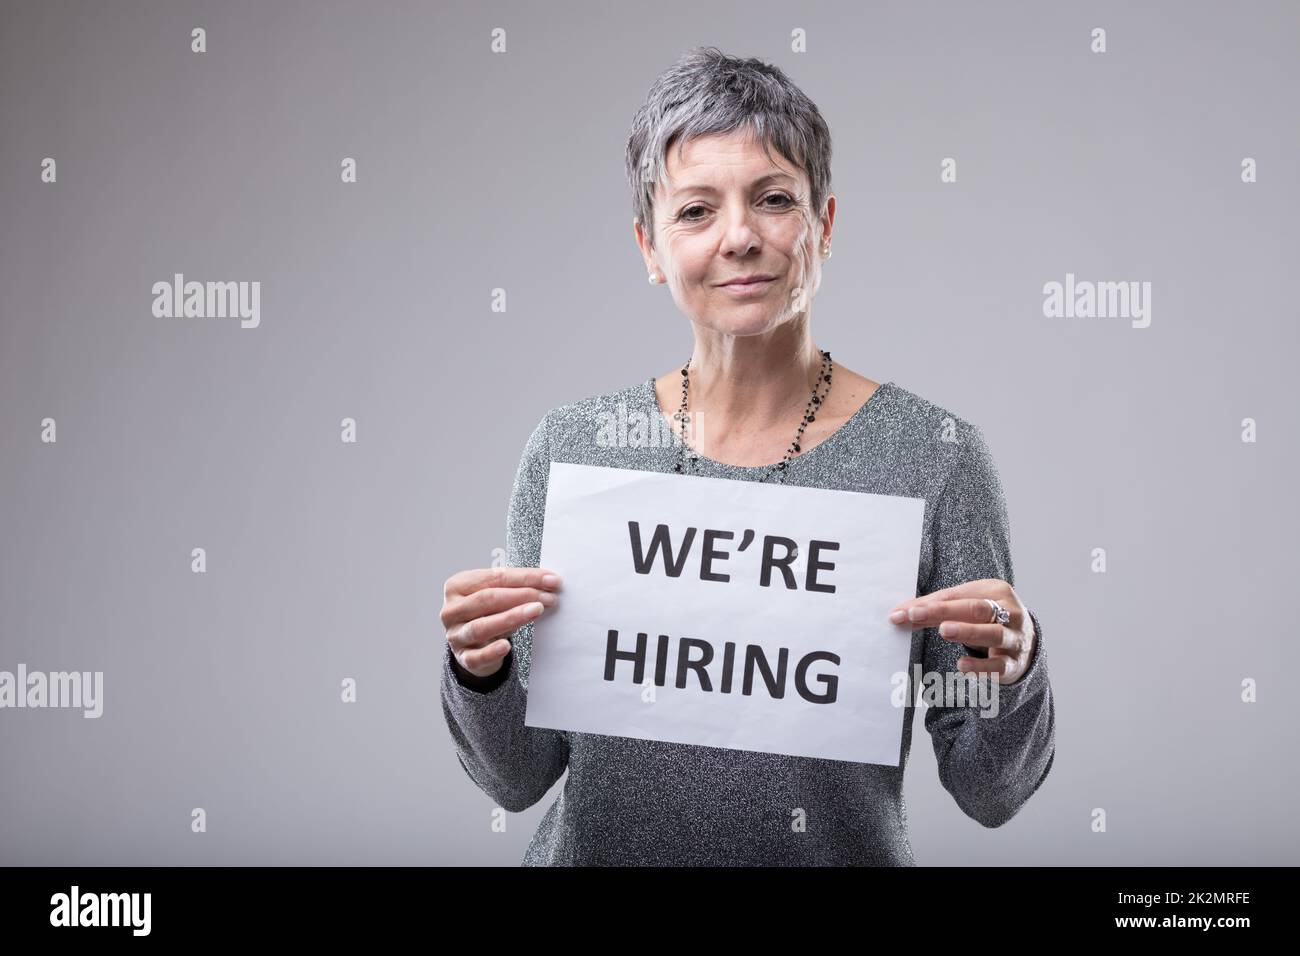 Personnel manageress holding up a sign Stock Photo